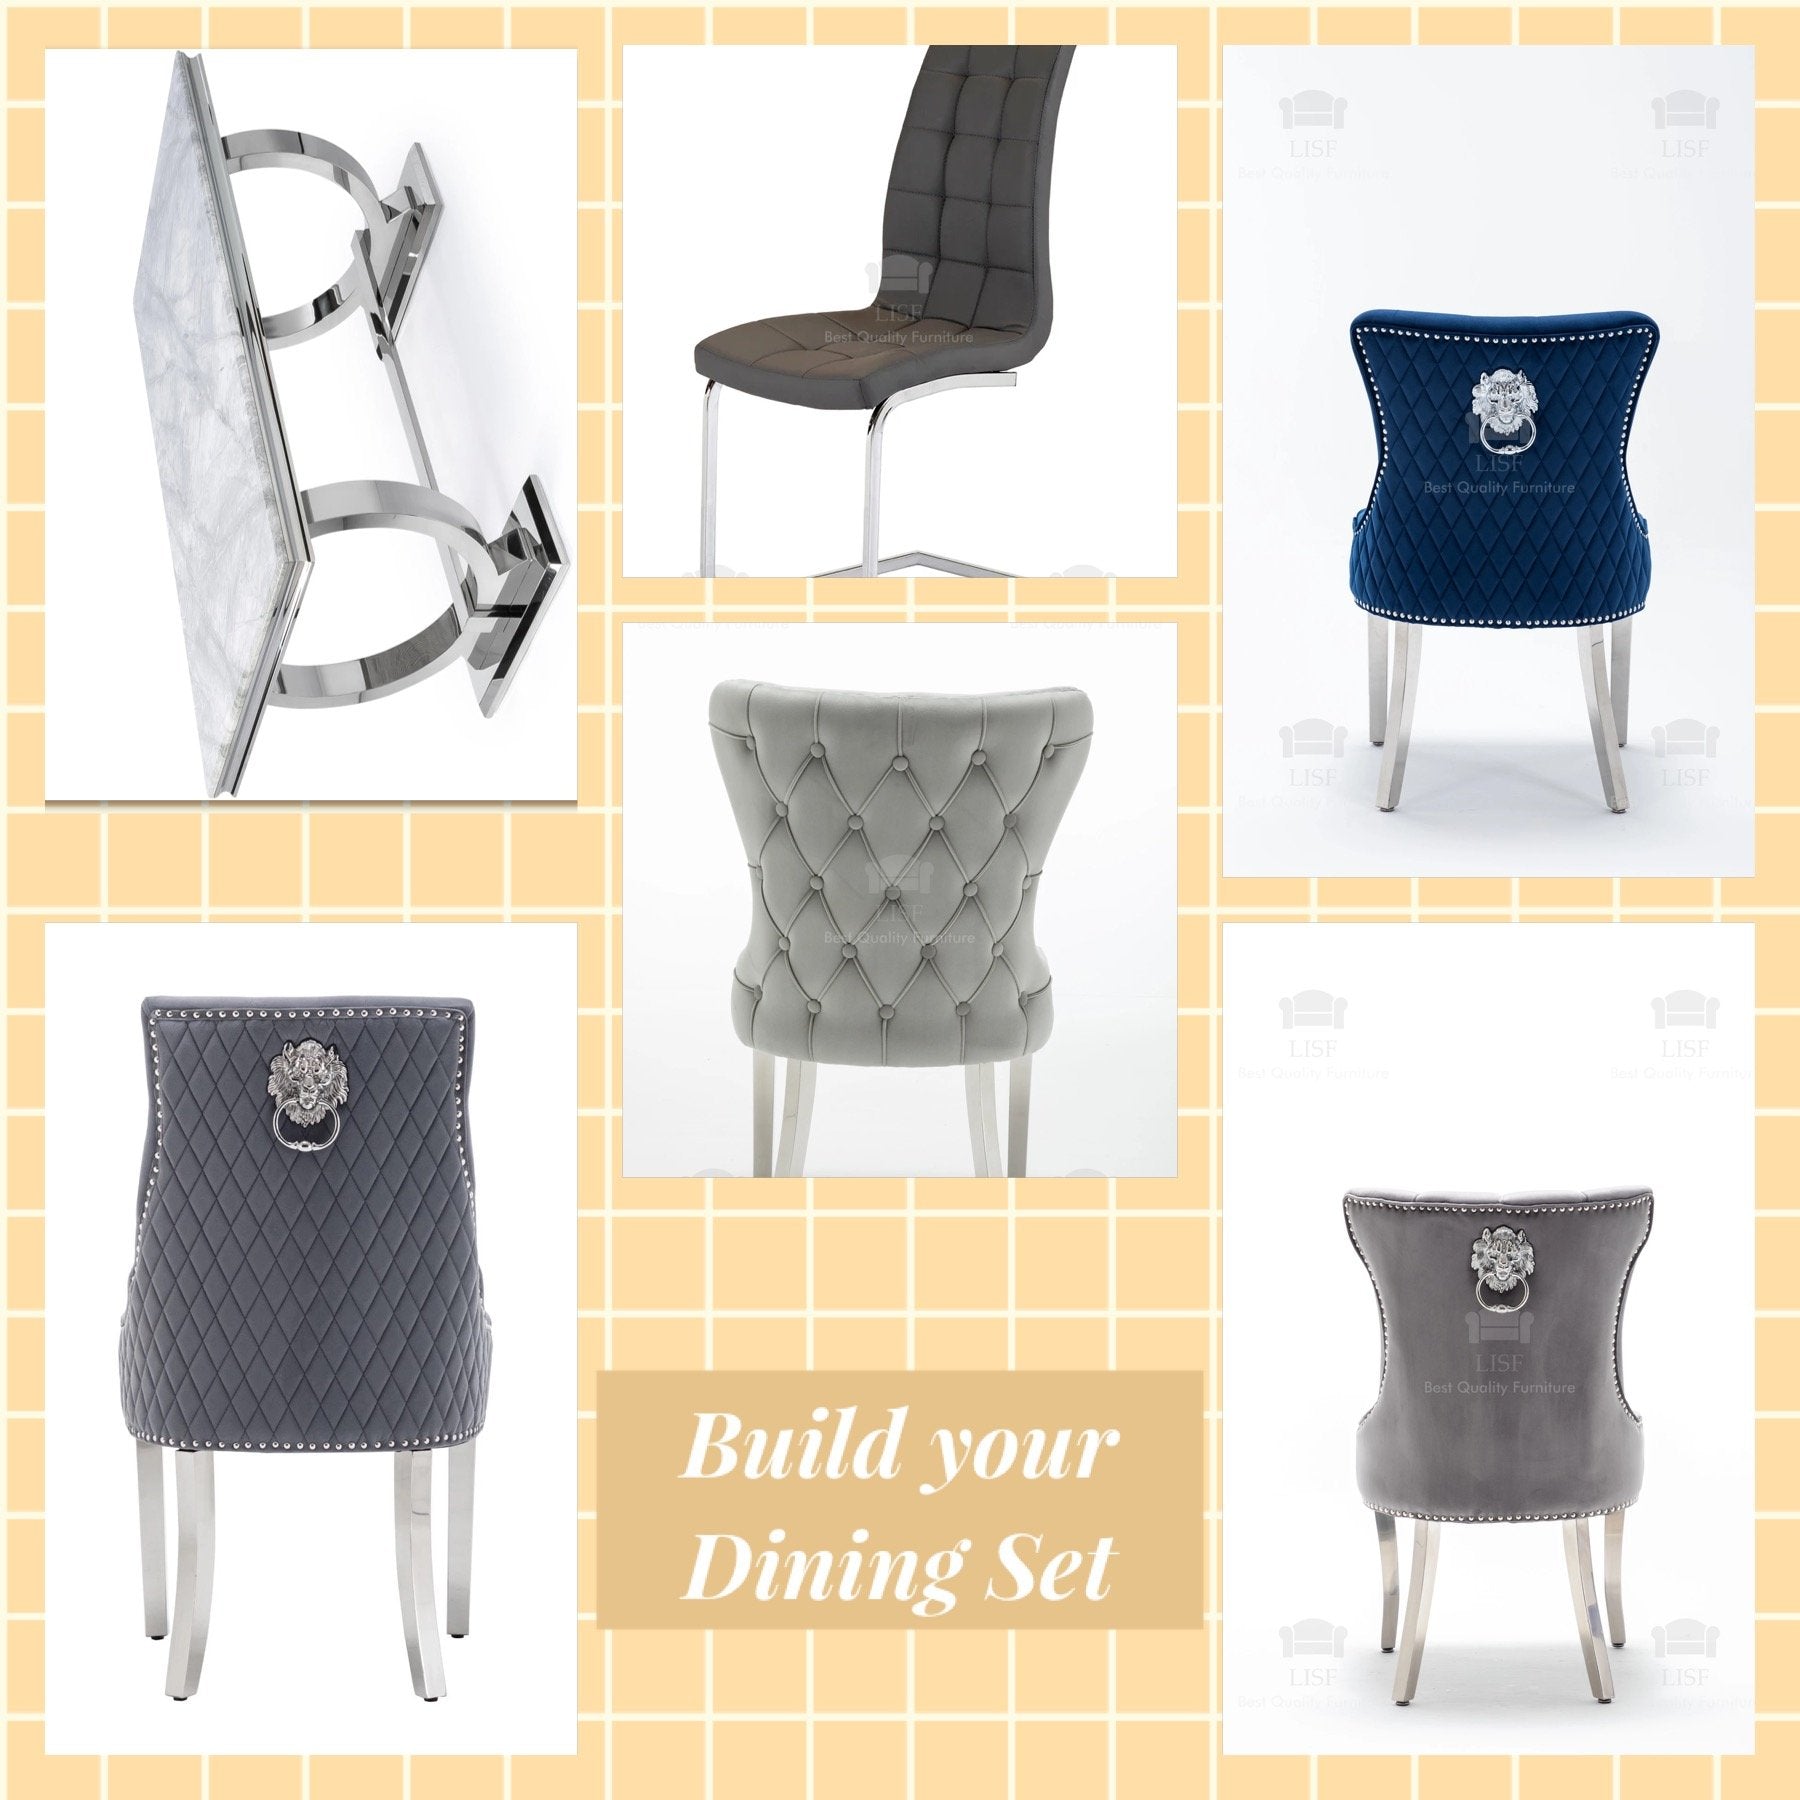 Build your Dining Set